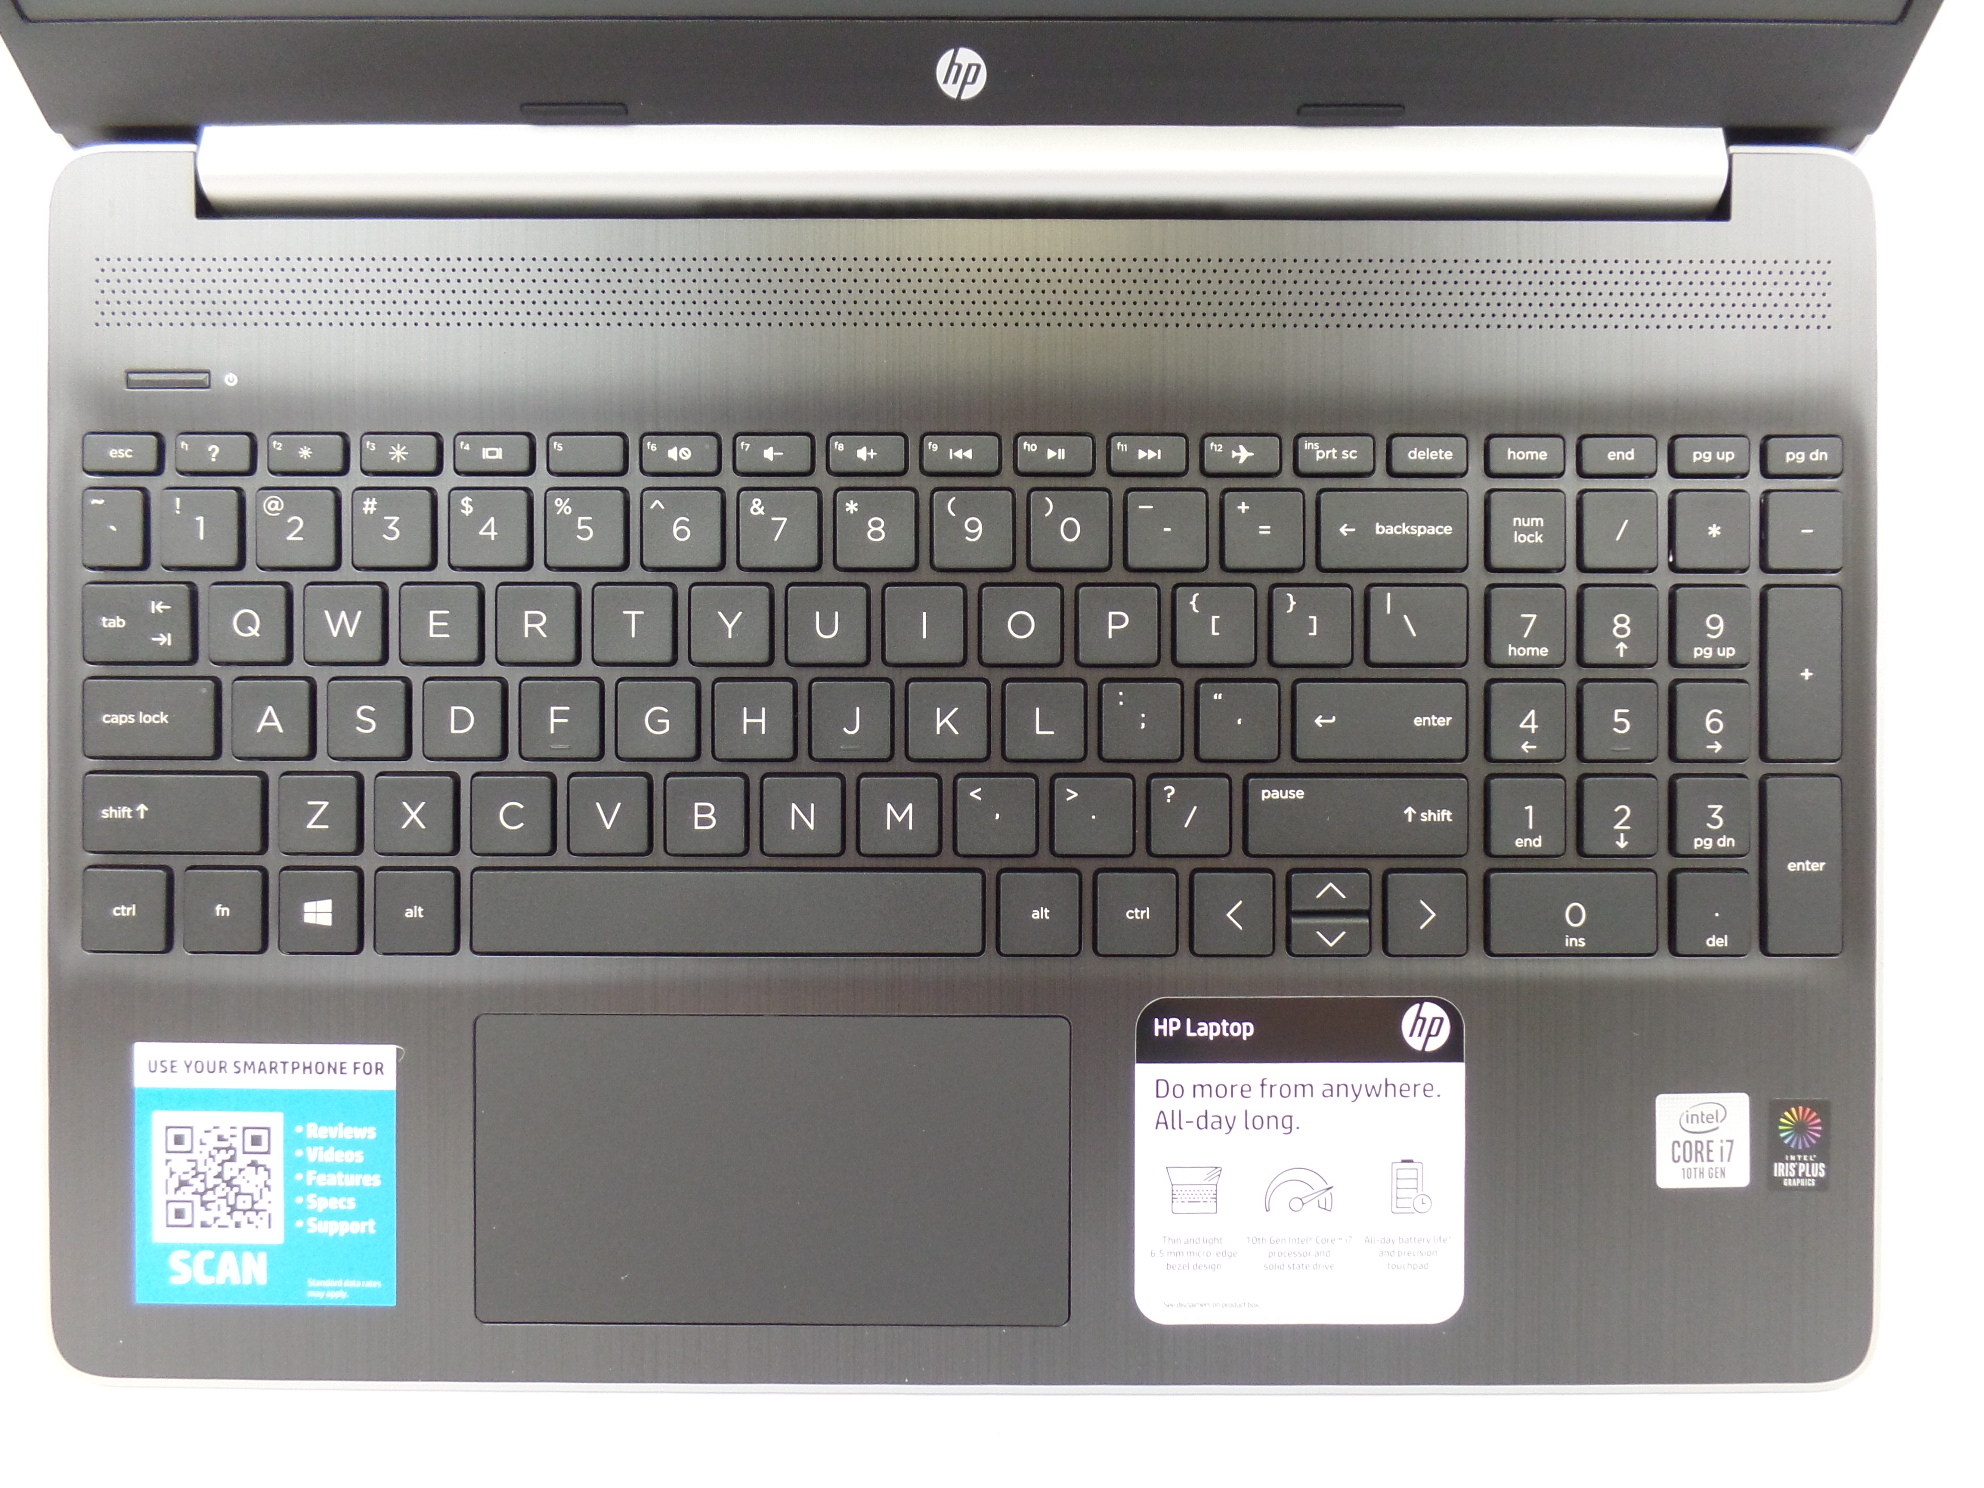 Used (good working condition) HP 15-dy1078nr 15.6" HD i7-1065G7 1.3GHz 8GB 256GB SSD Iris Plus W10H Laptop SD - image 3 of 6